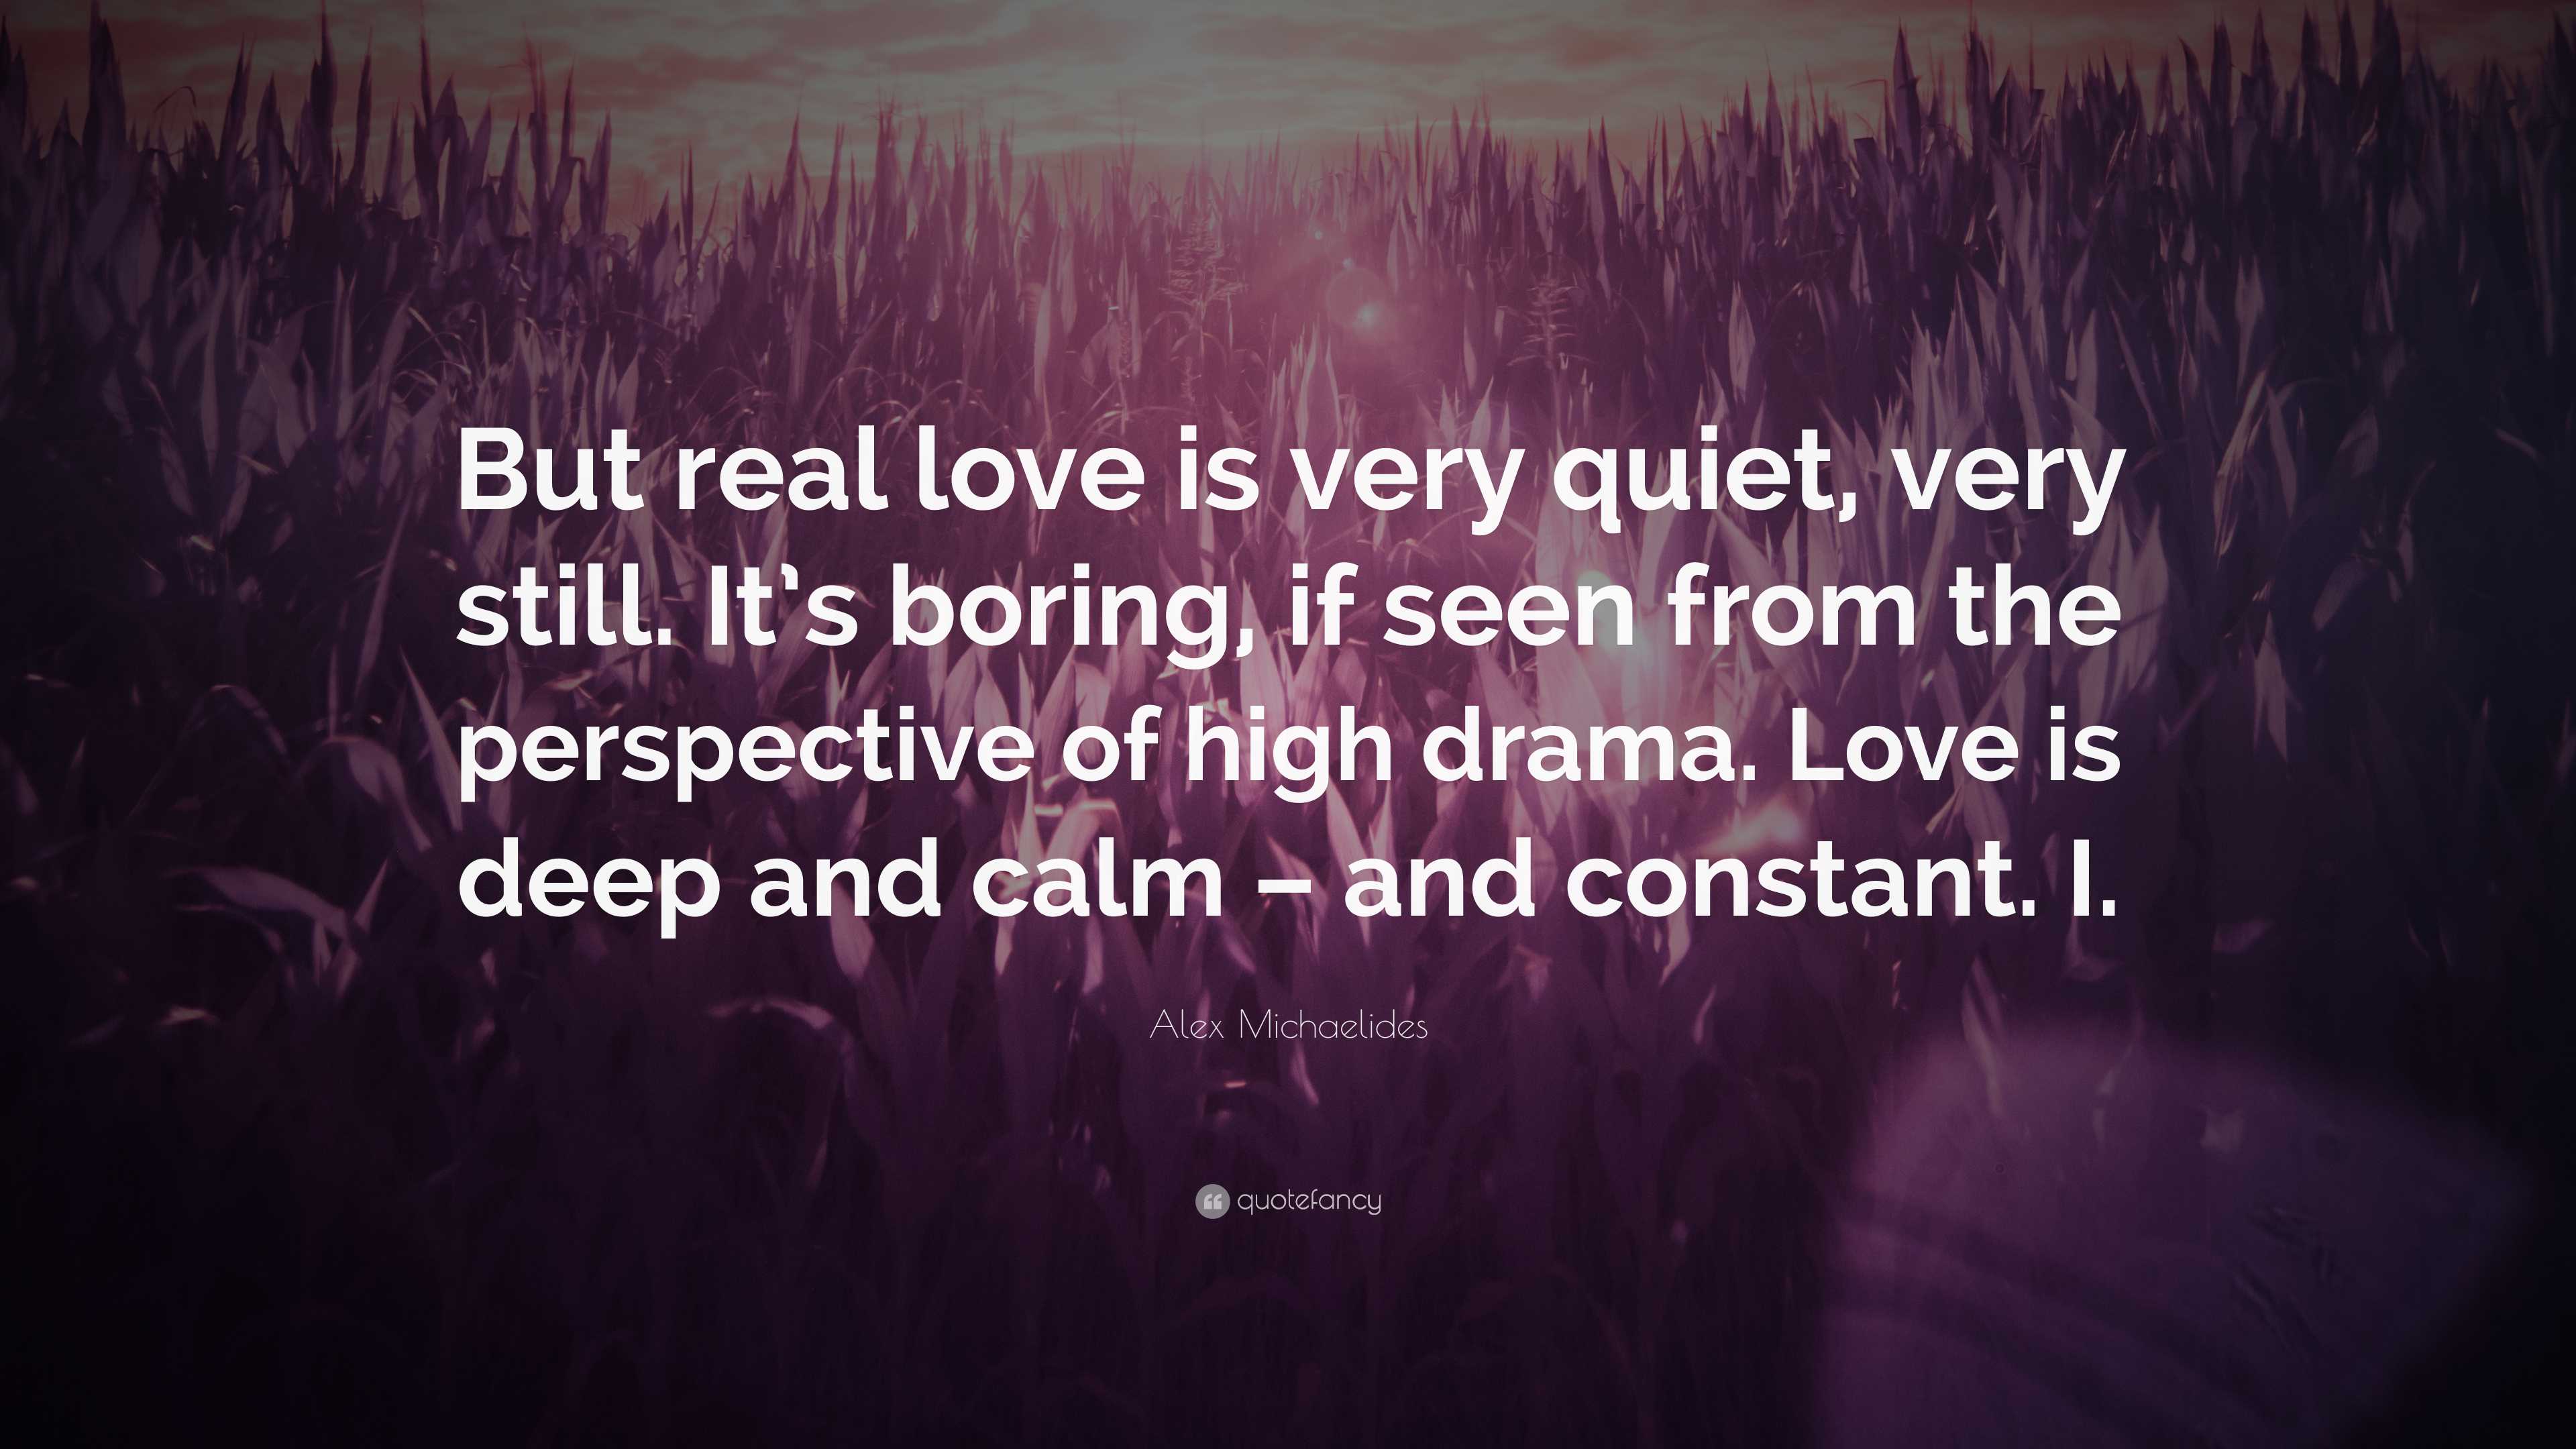 Alex Michaelides Quote: “But real love is very quiet, very still